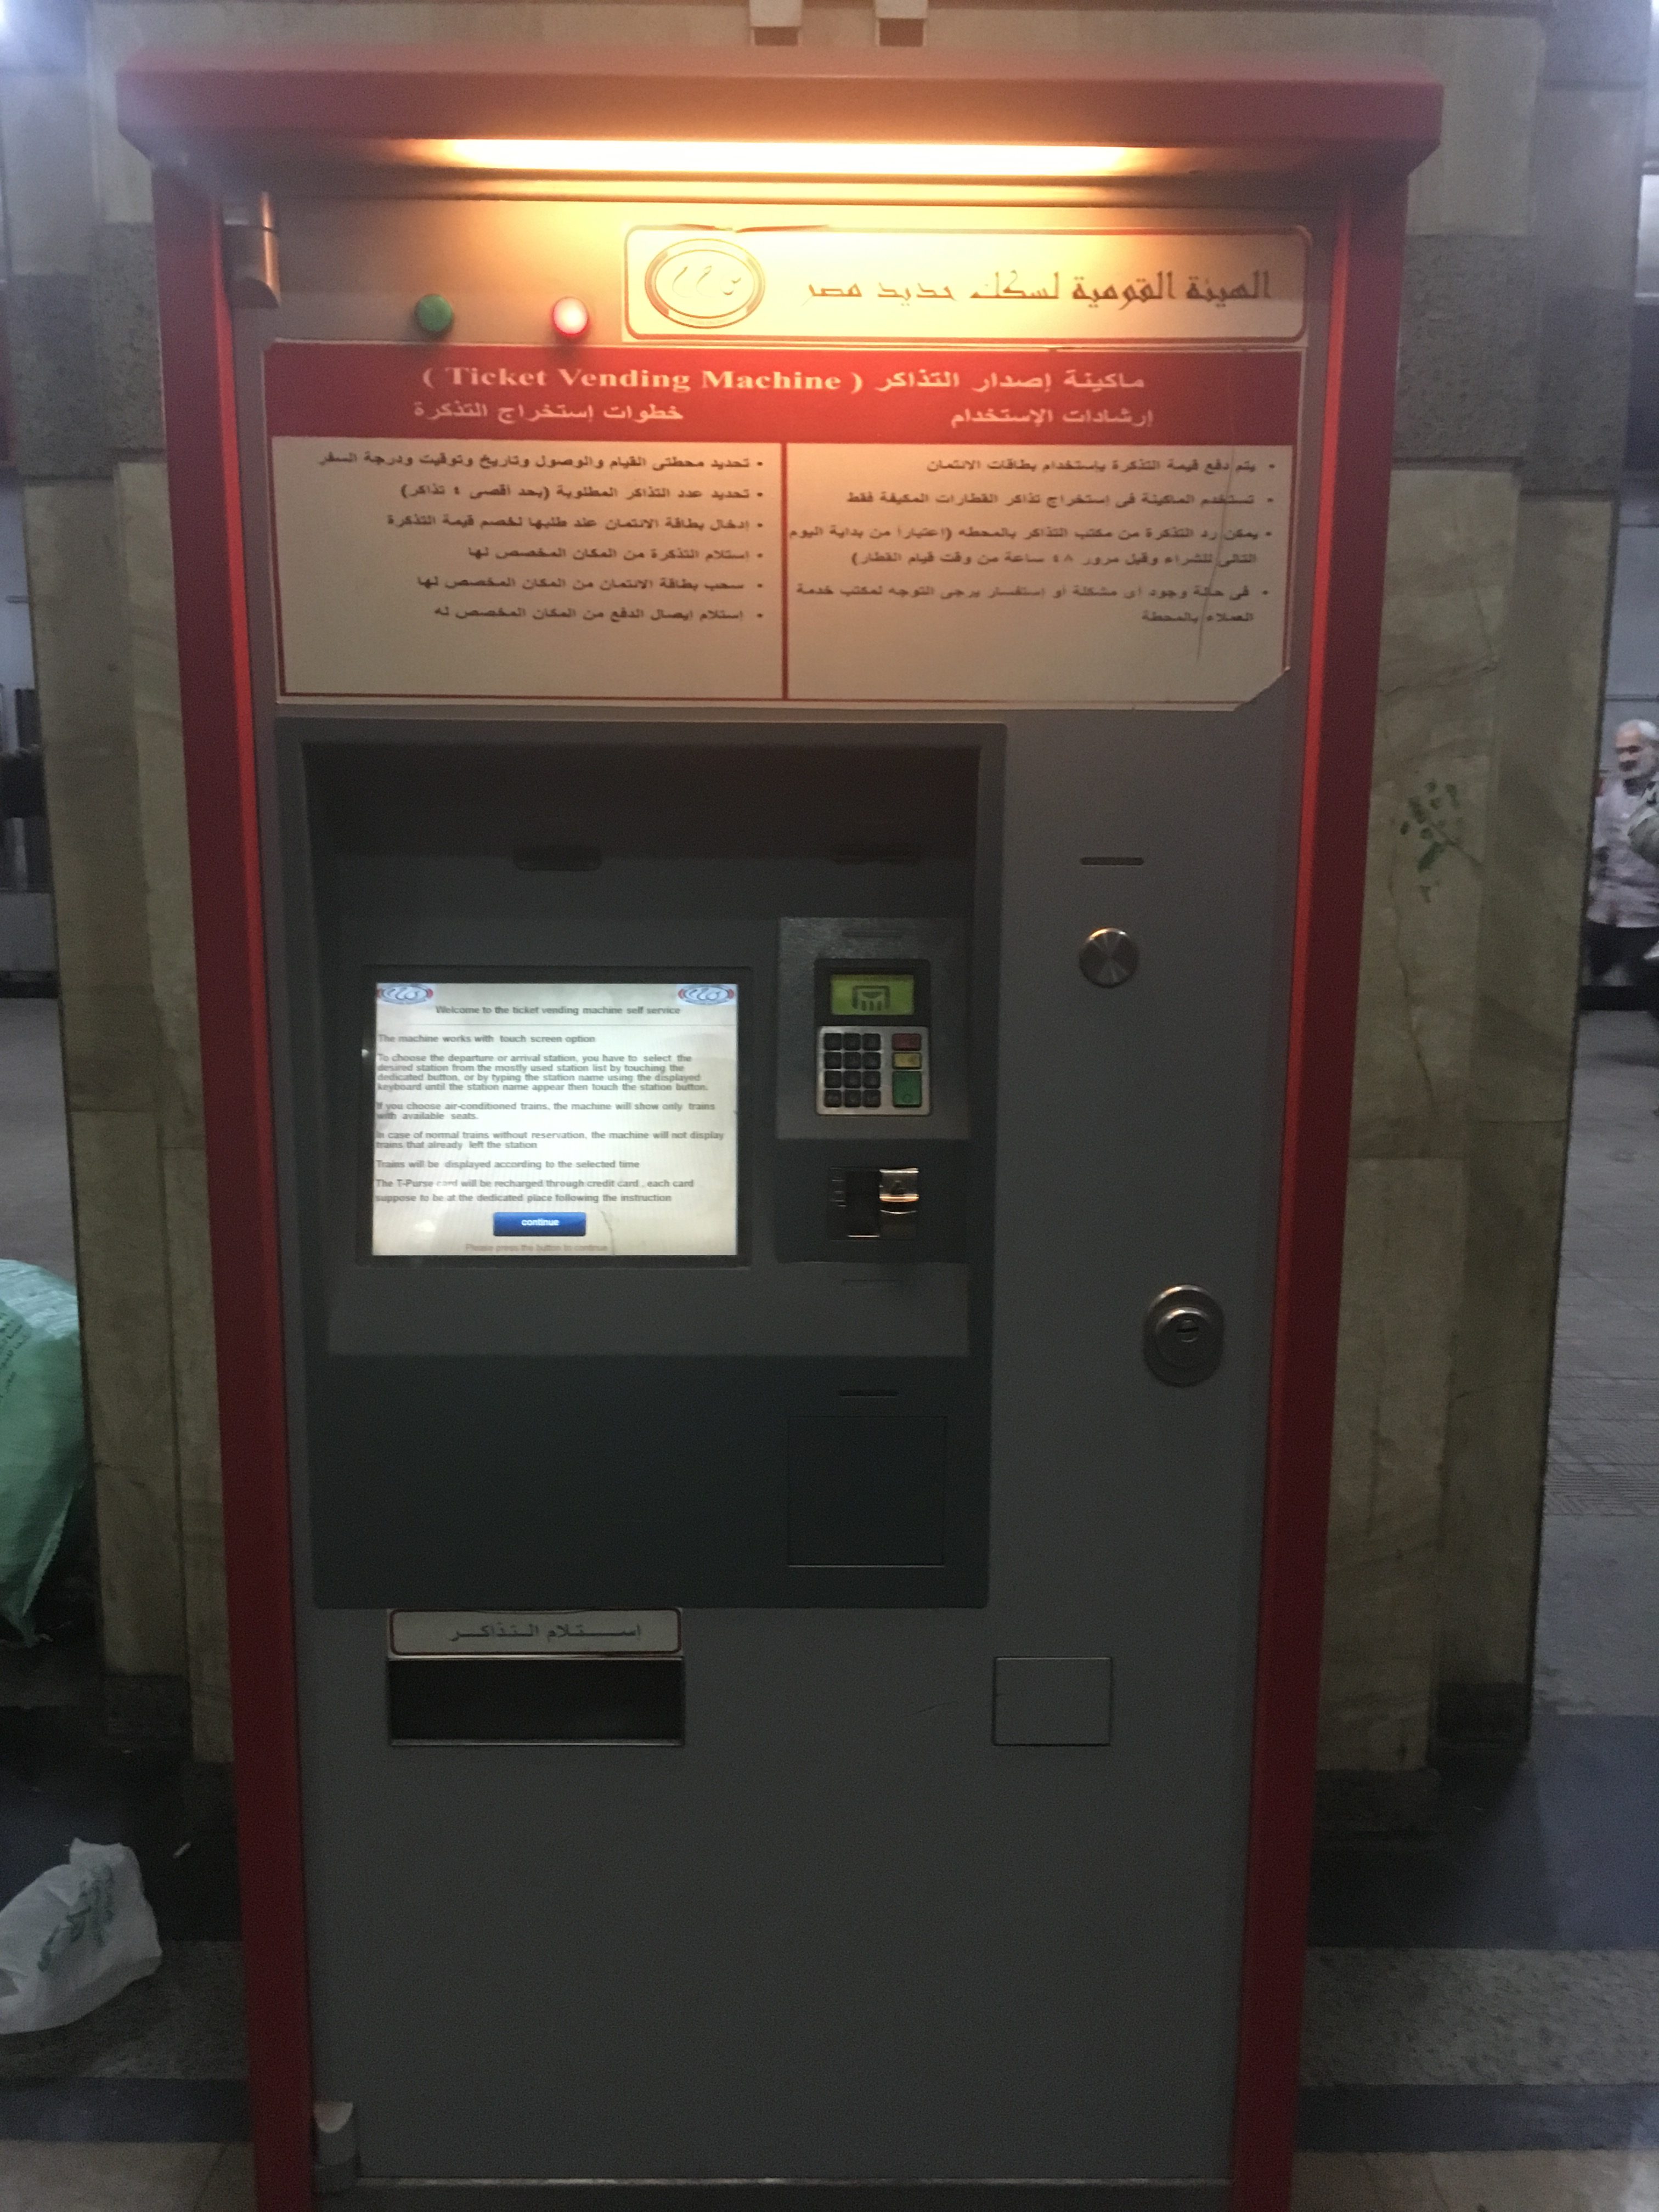 The vending machines at Ramsis Station